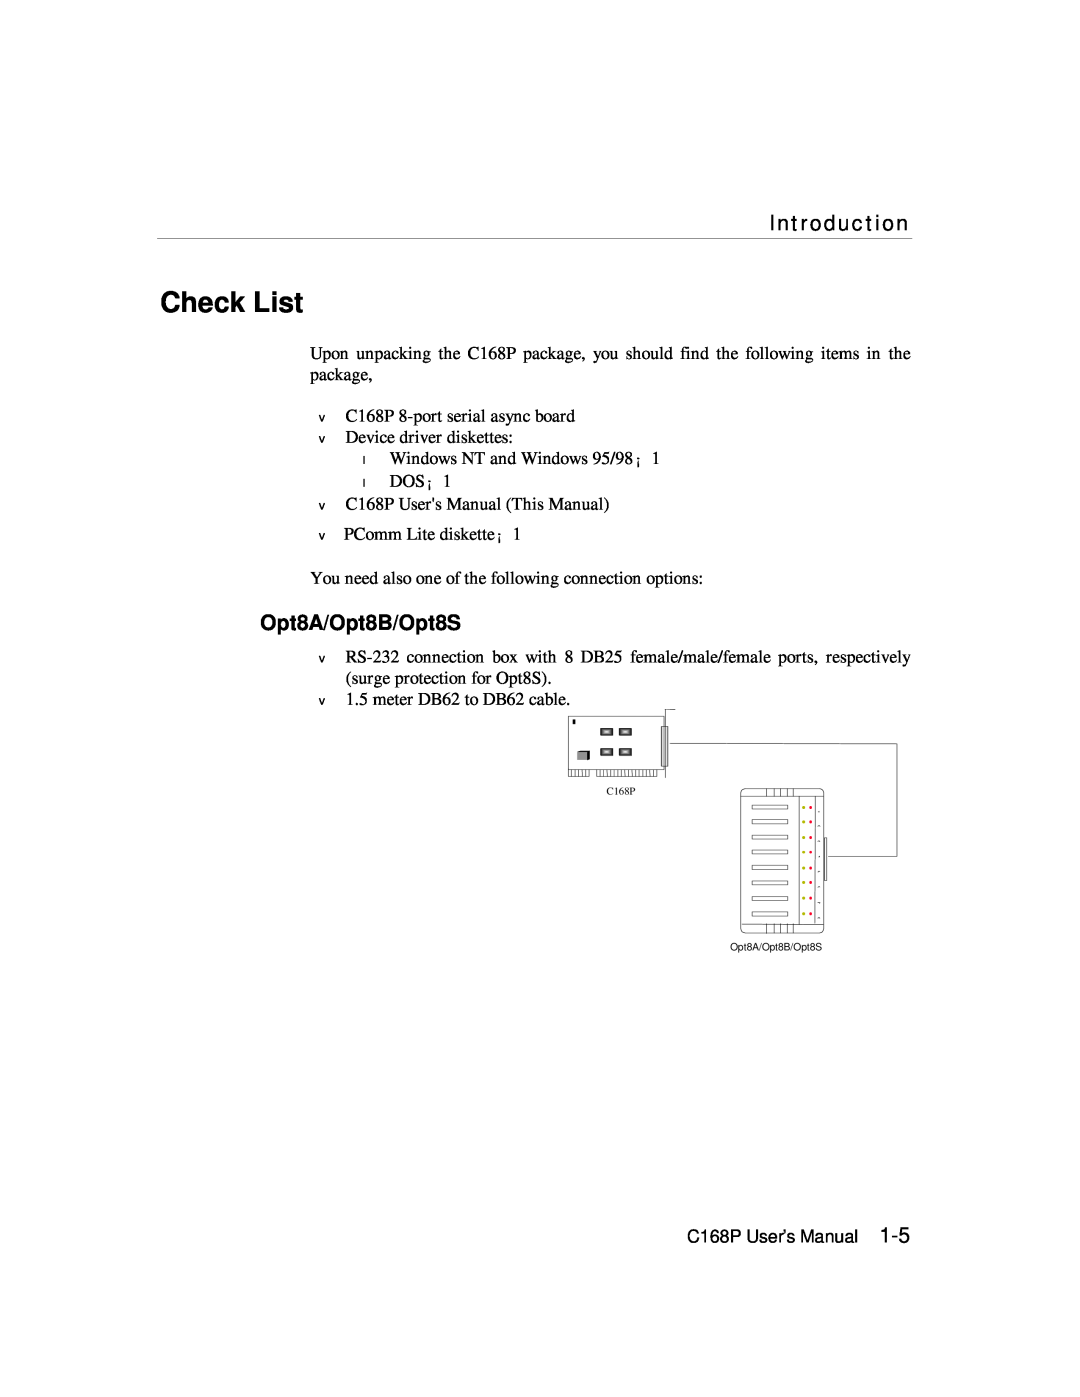 Moxa Technologies C168P user manual Check List, Opt8A/Opt8B/Opt8S, Introduction 